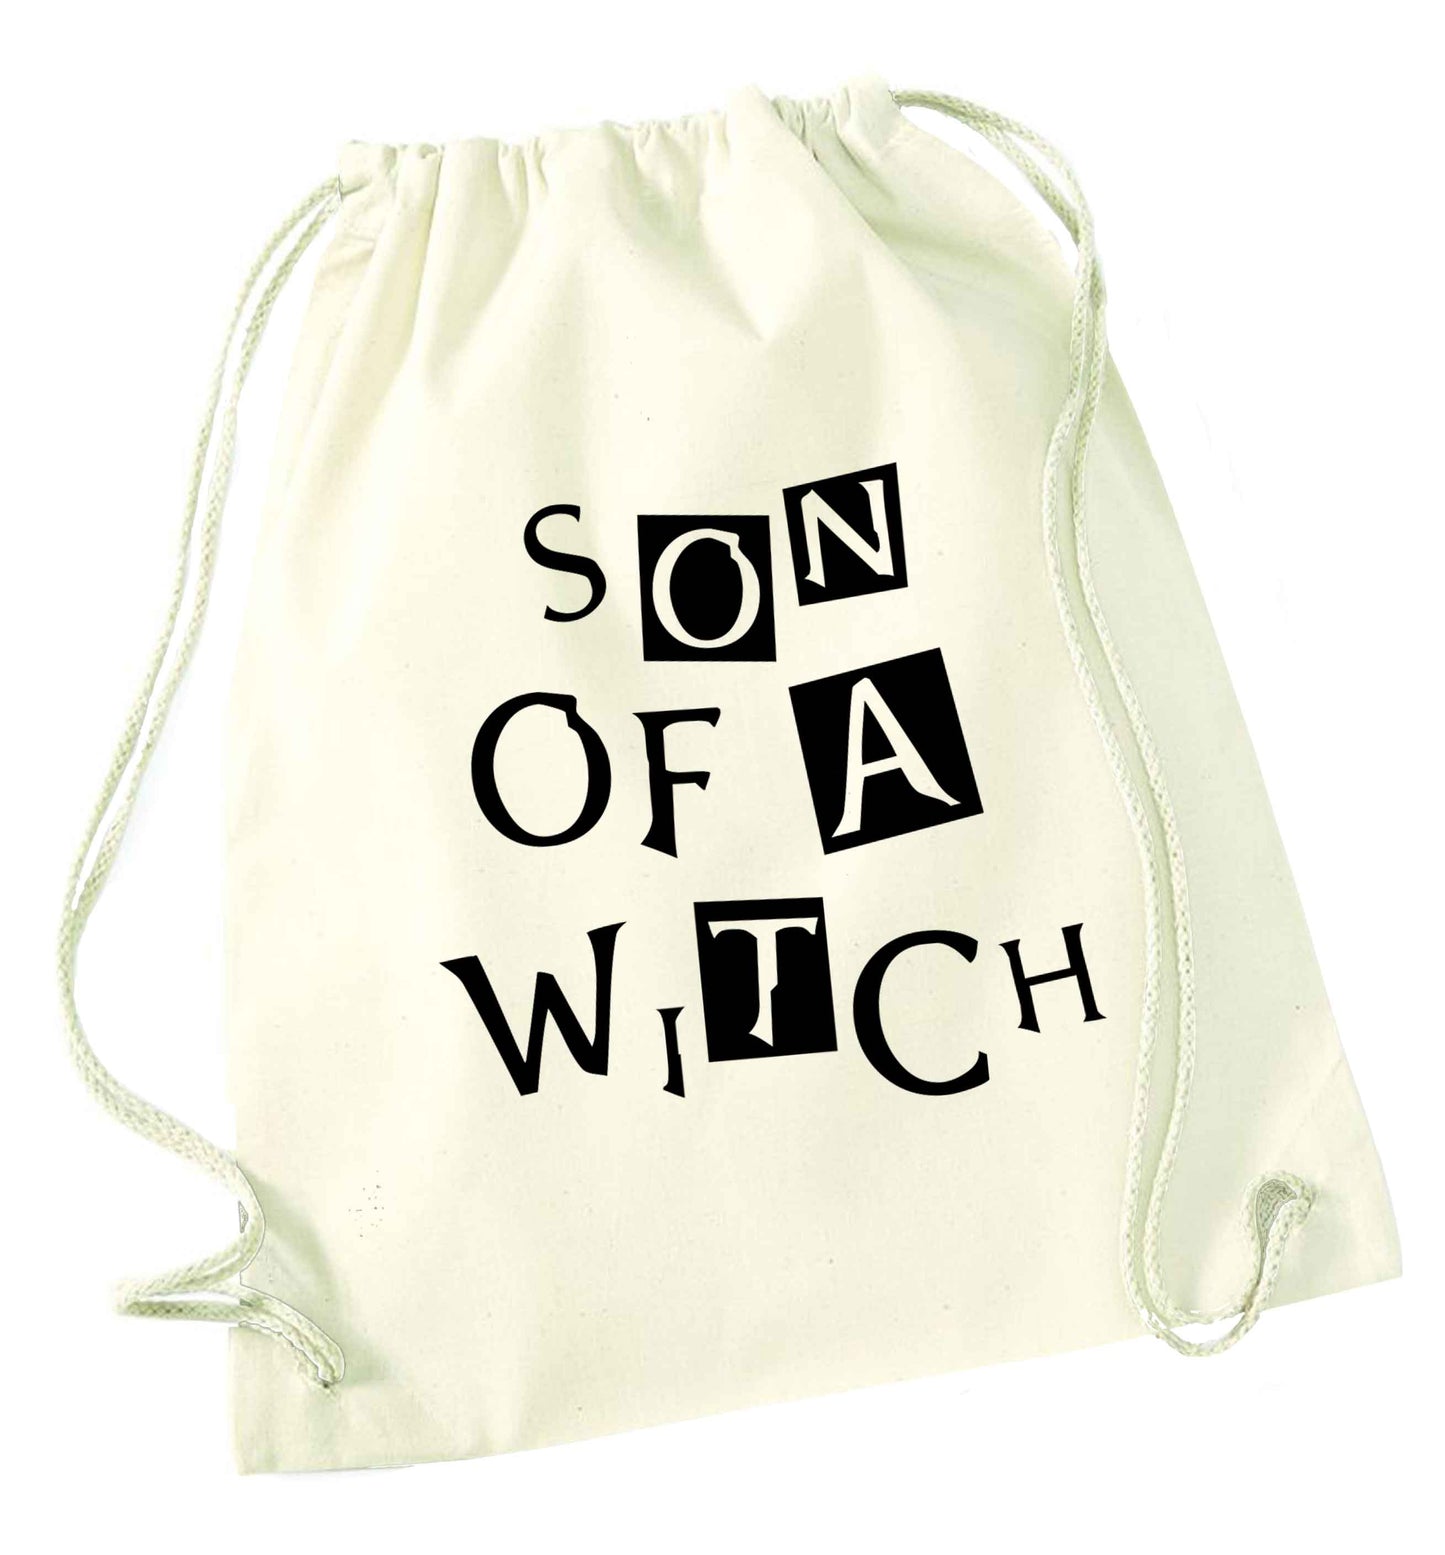 Son of a witch natural drawstring bag